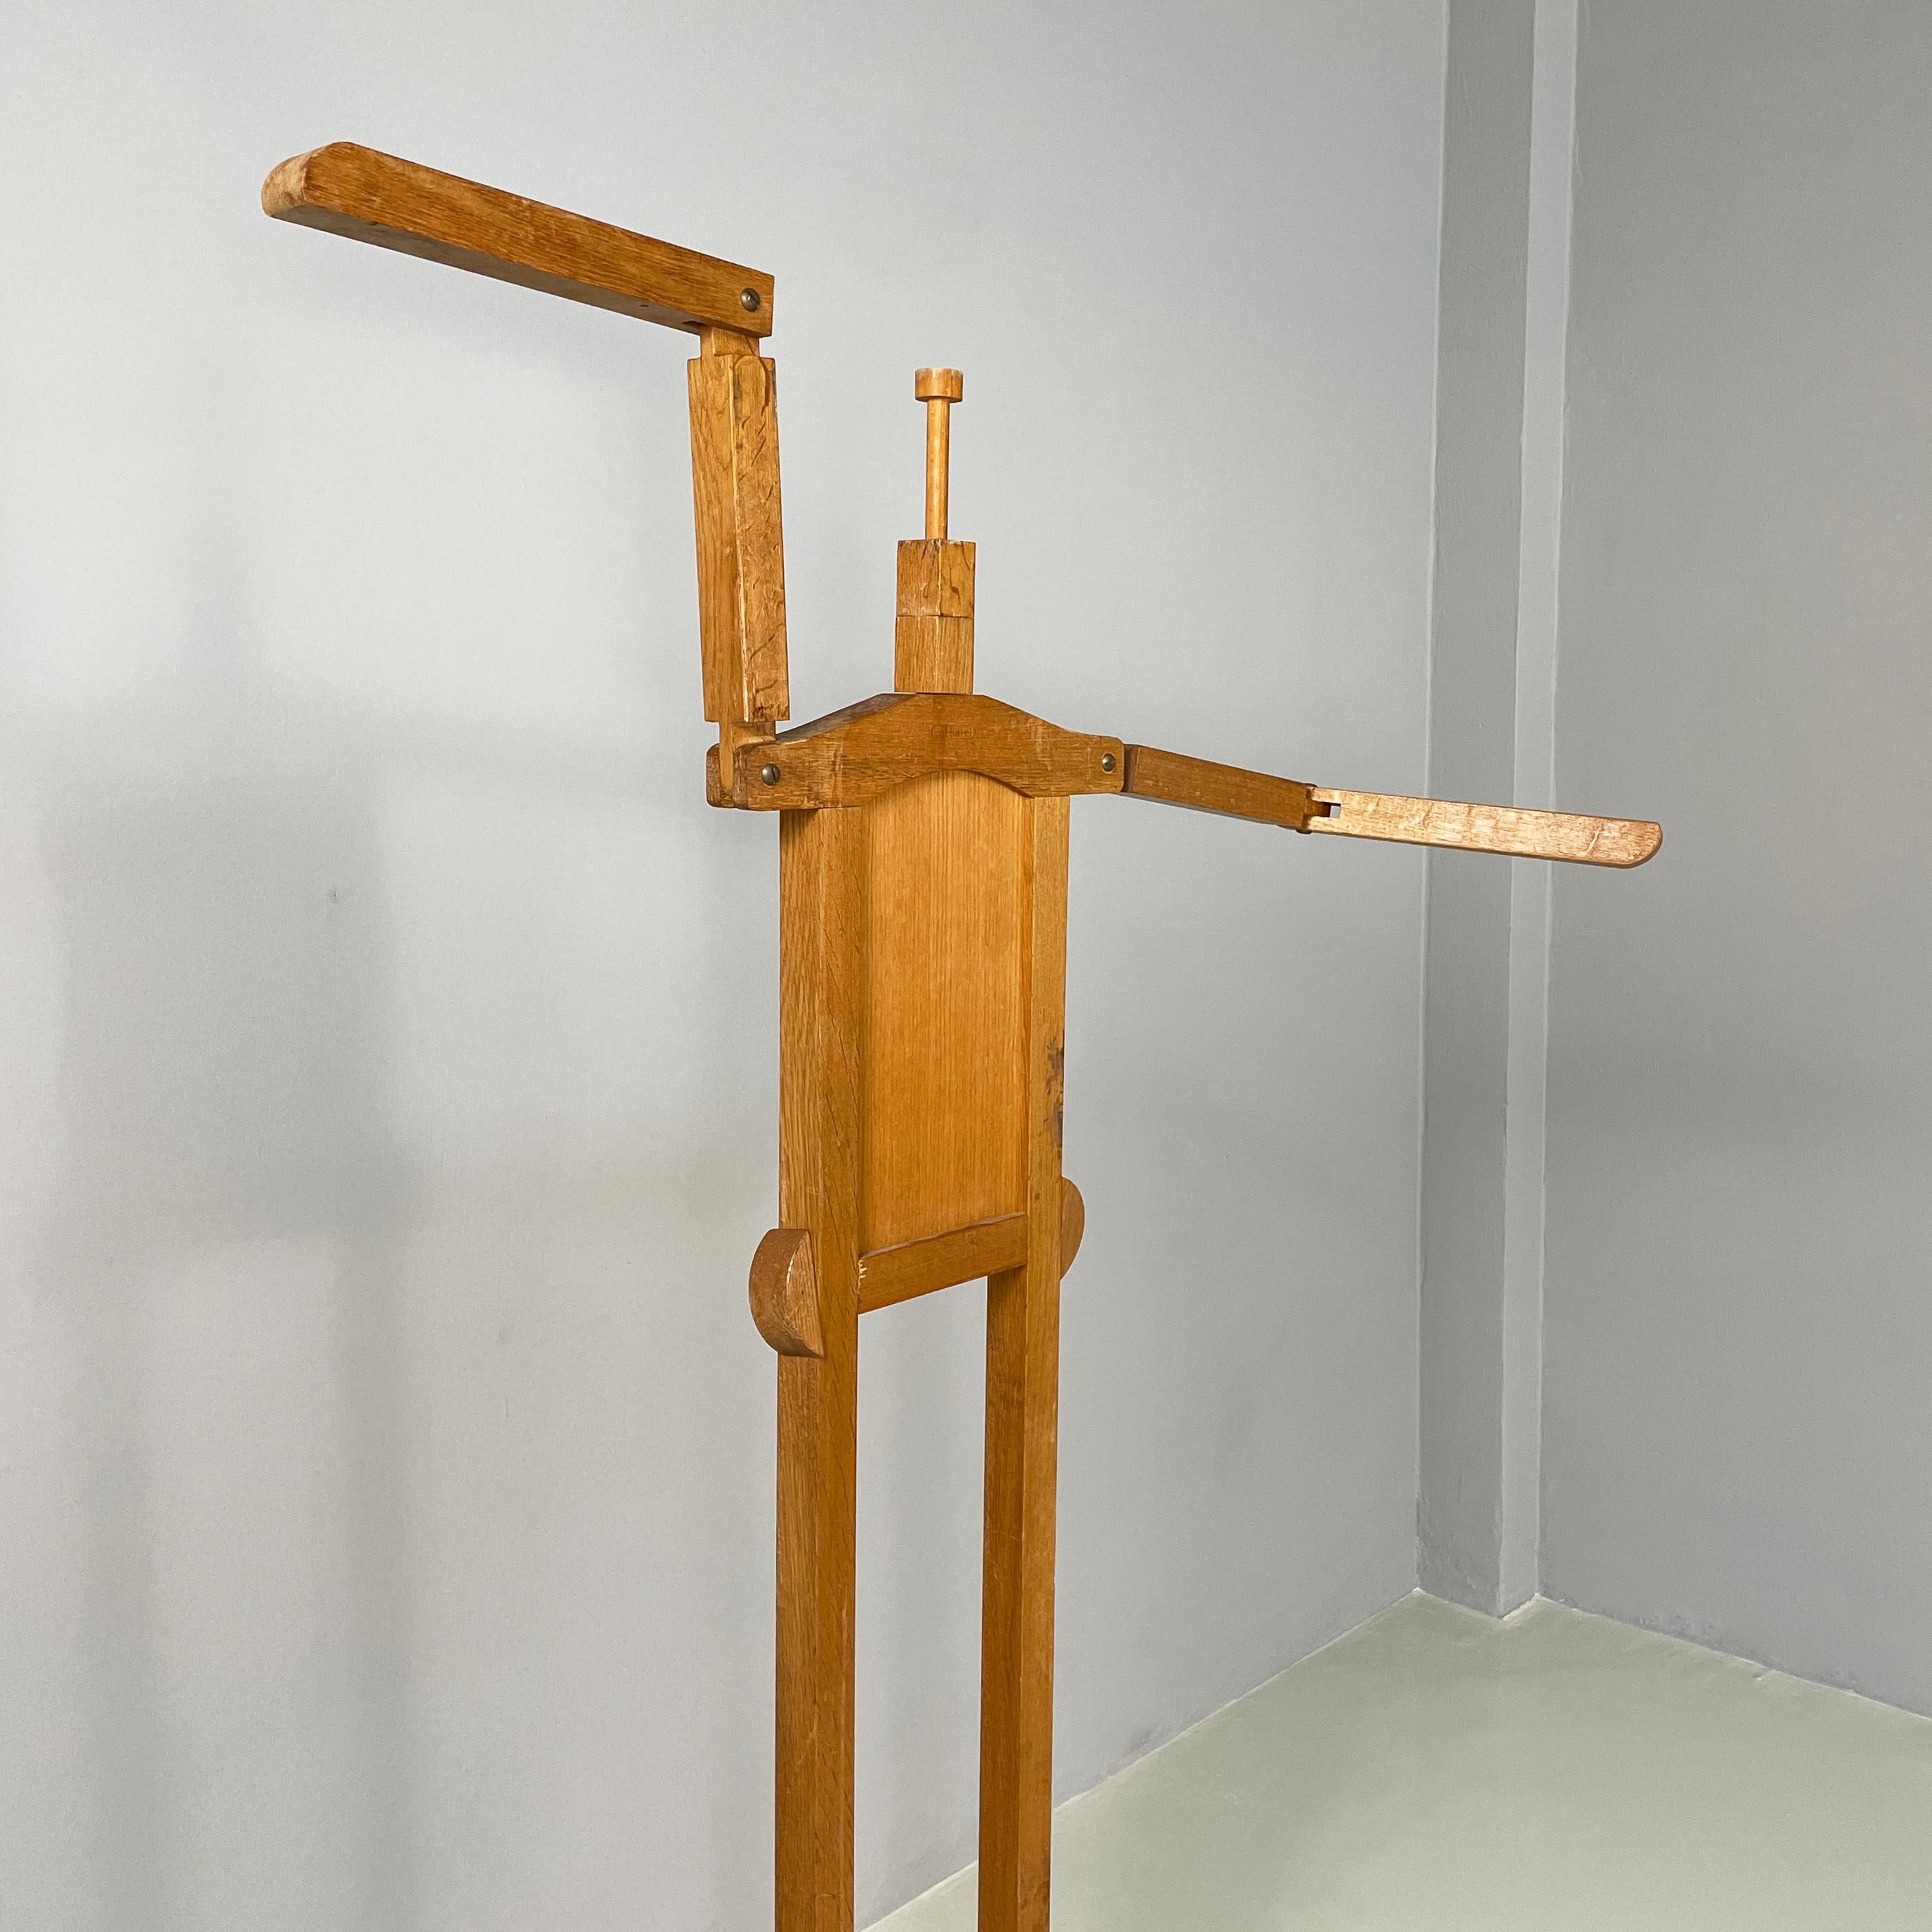 Italian modern Wood valet stand with hat holder by BeroDesign Cacharel, 1980s For Sale 4